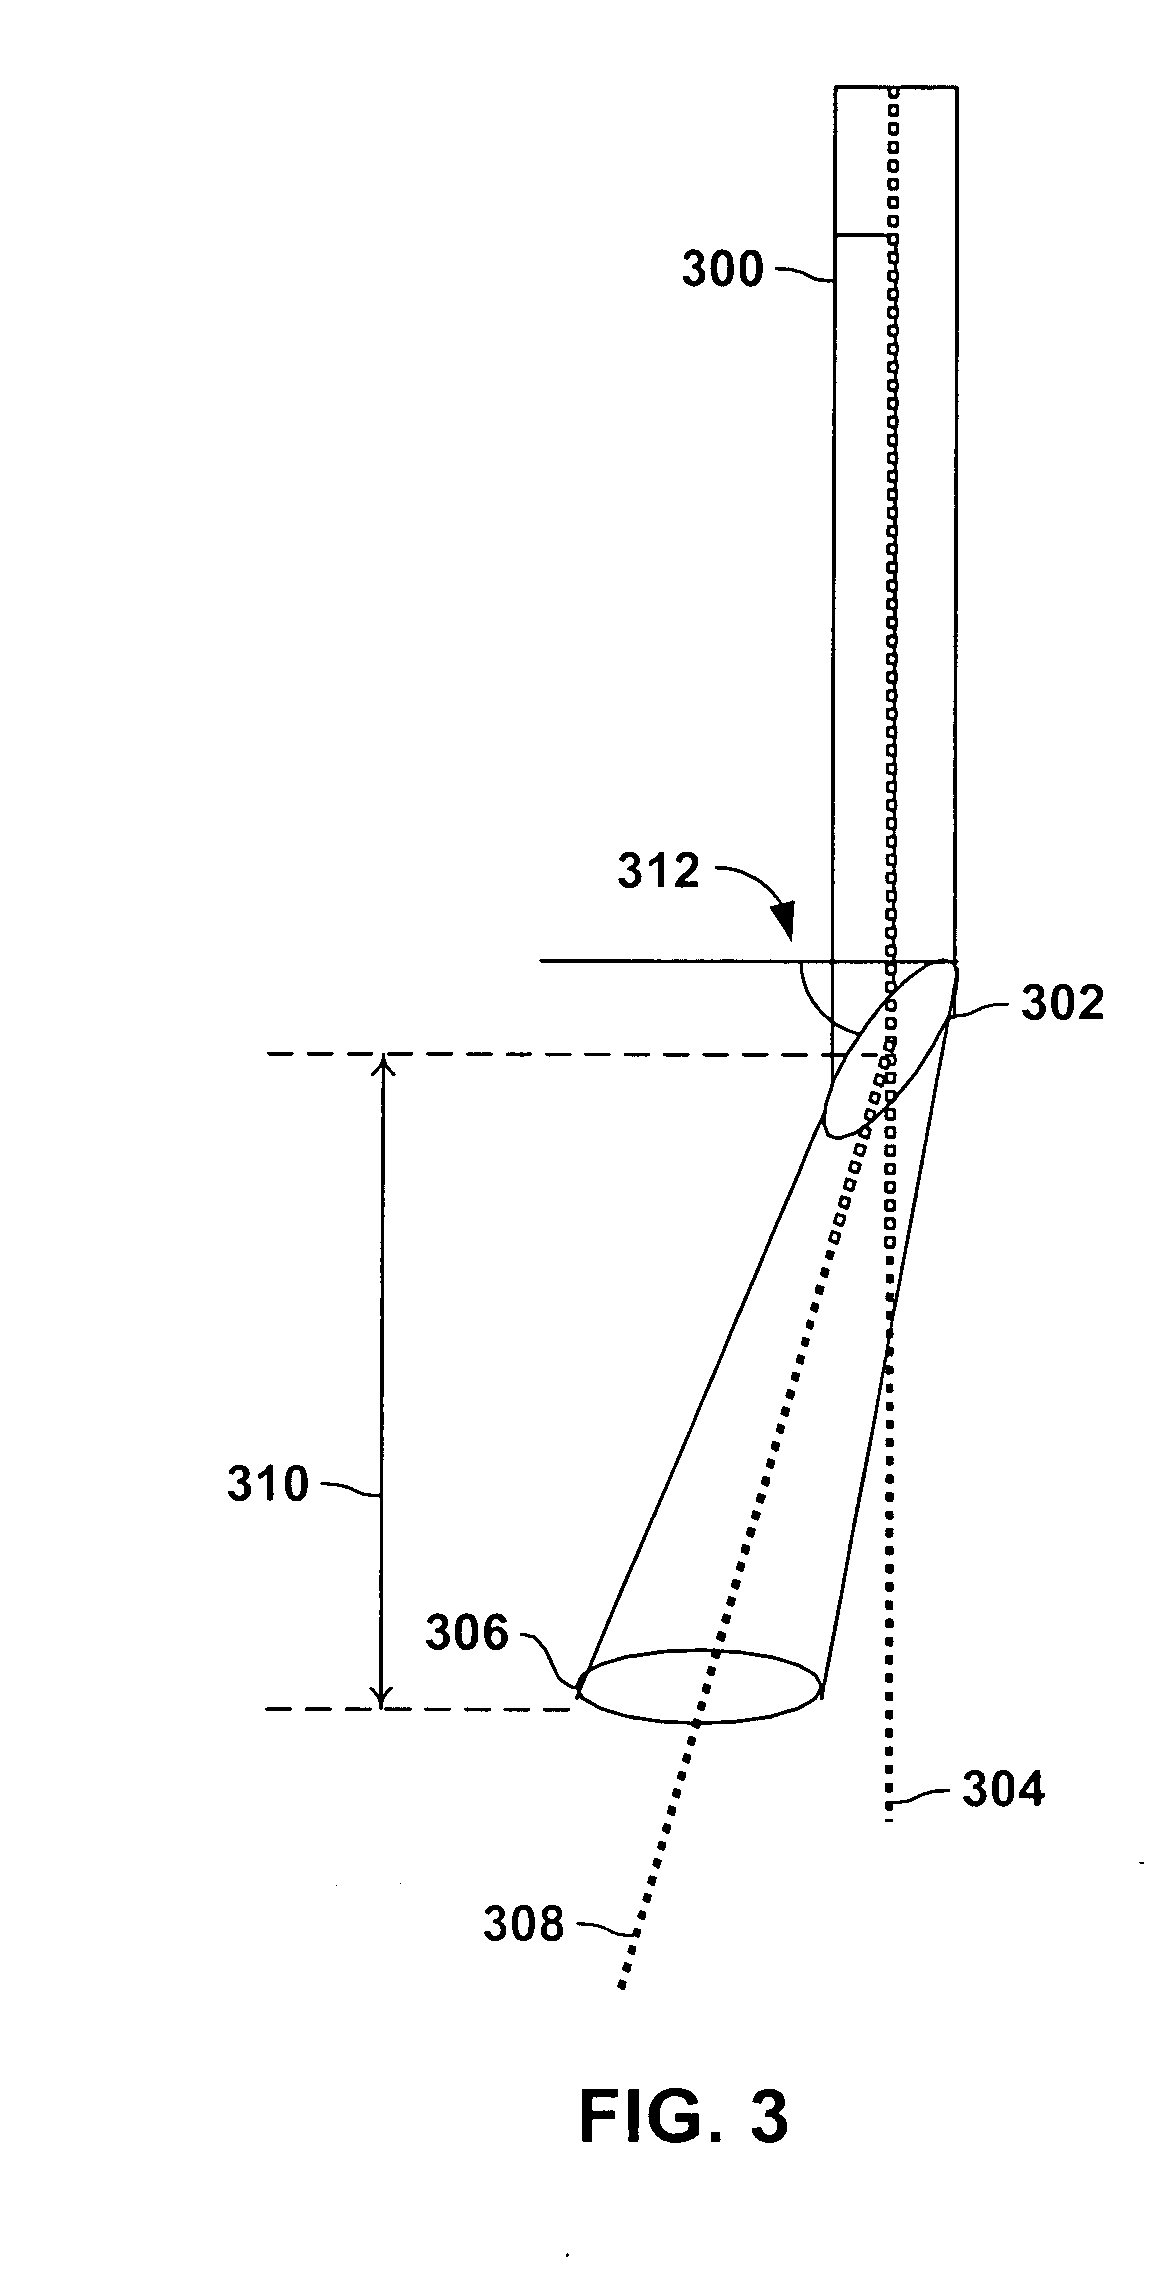 System and method to decrease probe size for improved laser ultrasound detection